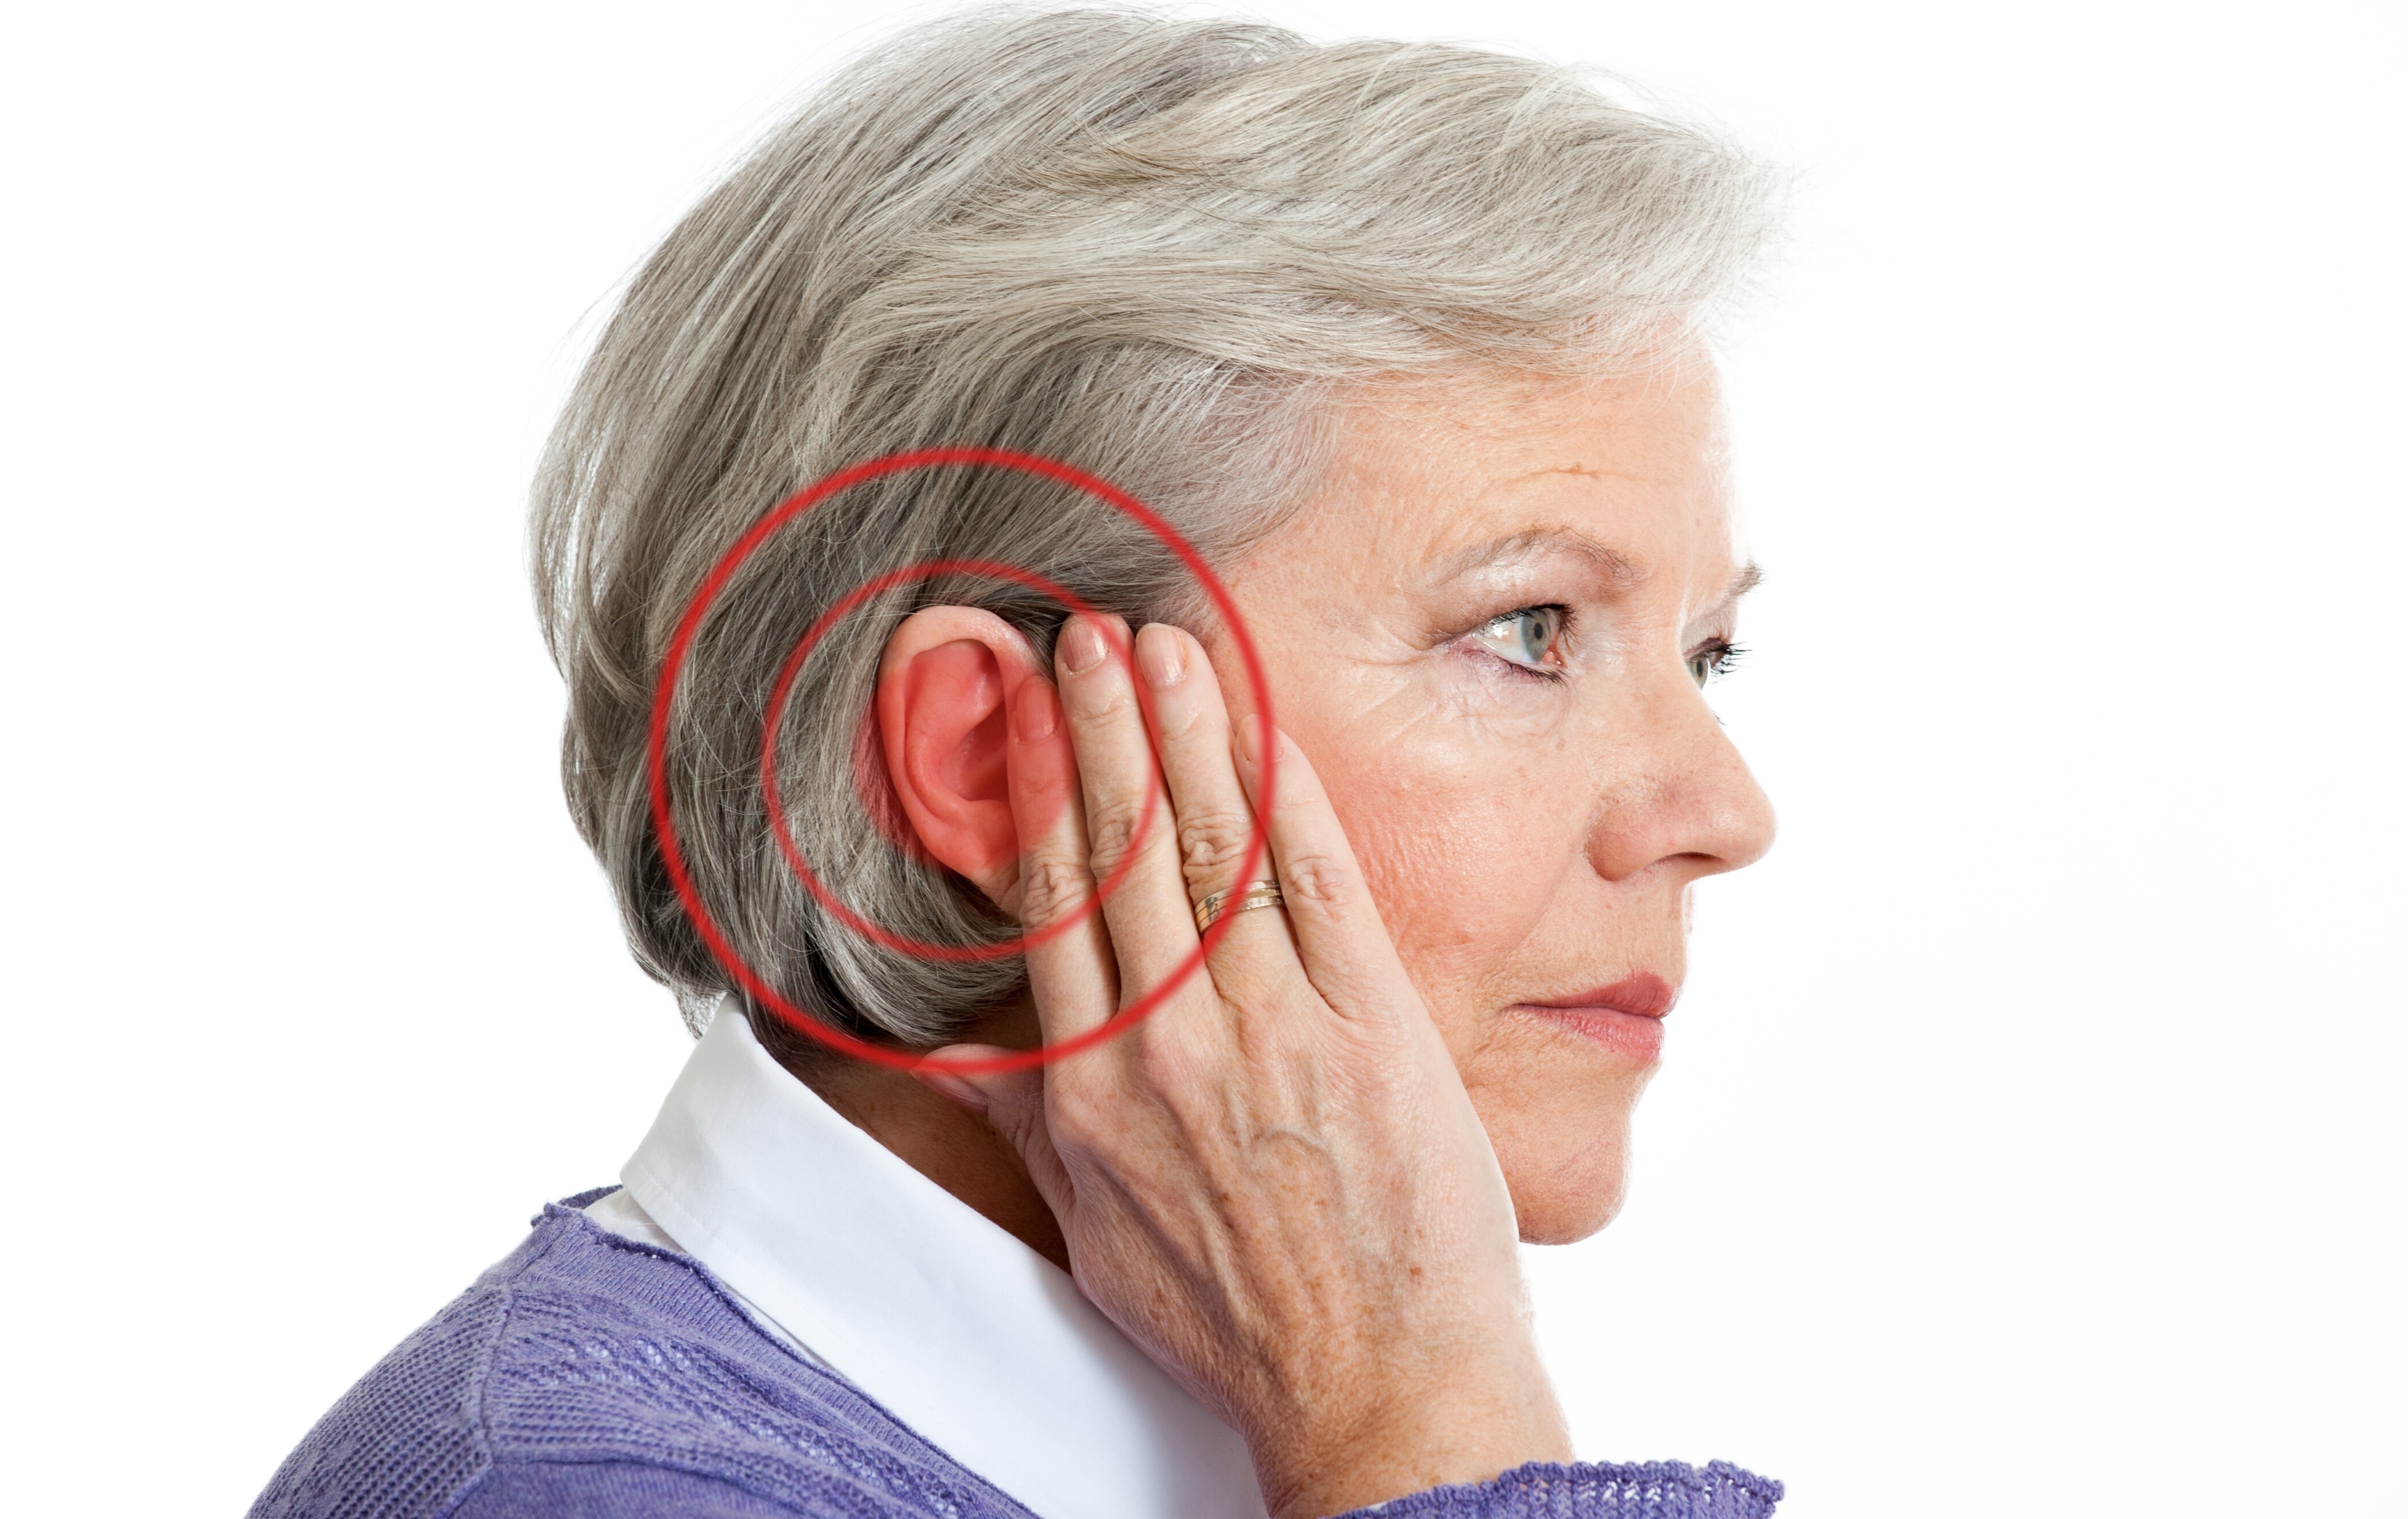 Can Tinnitus Be Higher Tone than What You Can Hear for Real?